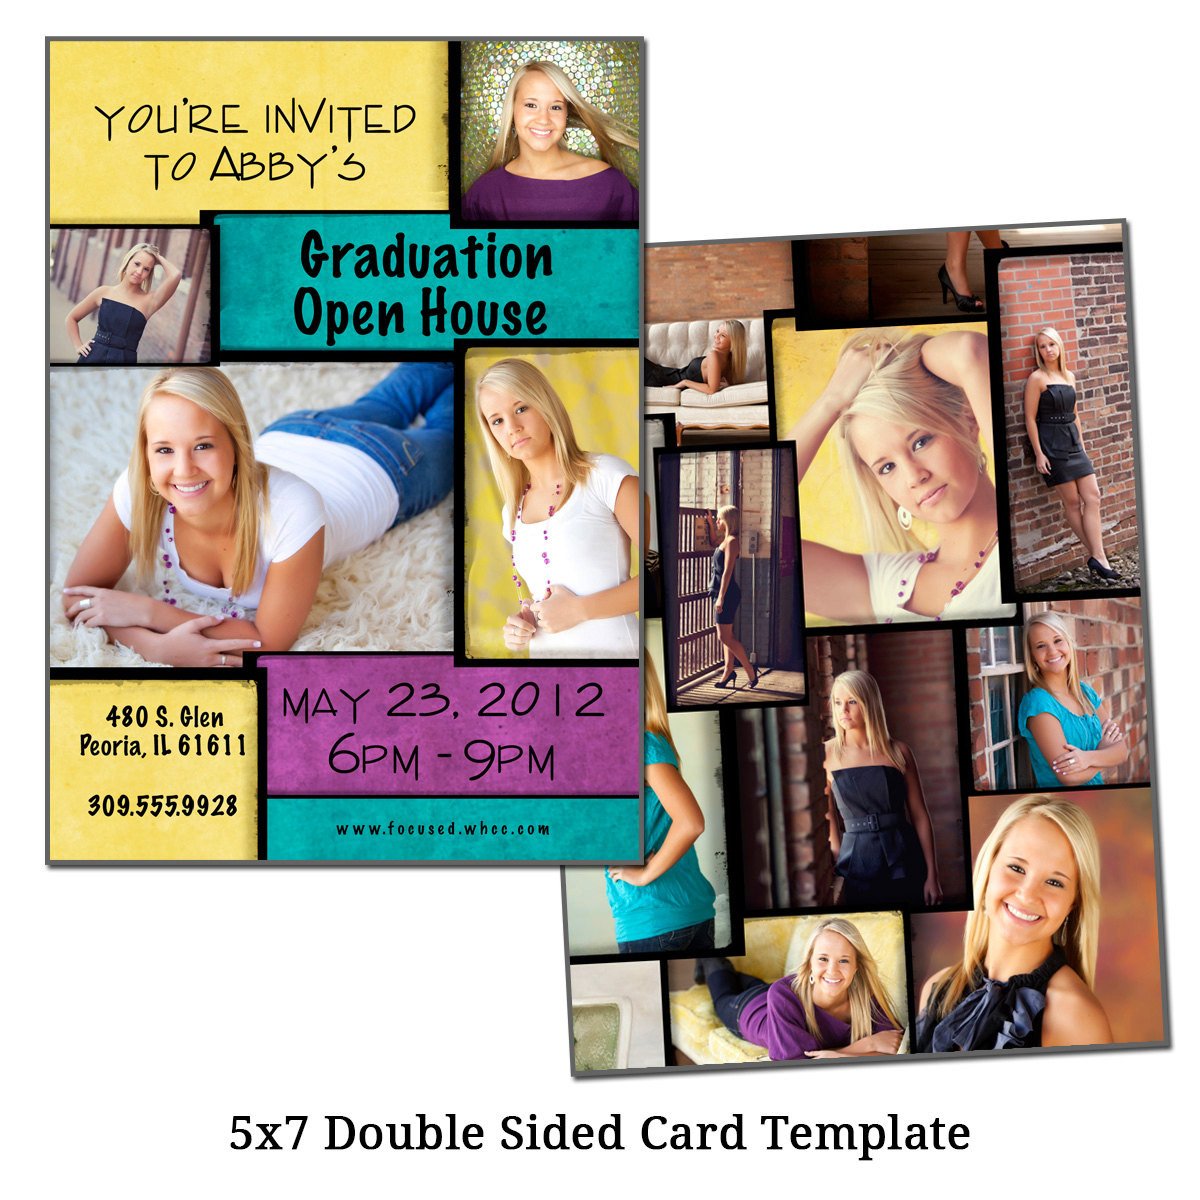 5x7 Double Sided Card Template BRIGHT COLLAGE Digital File